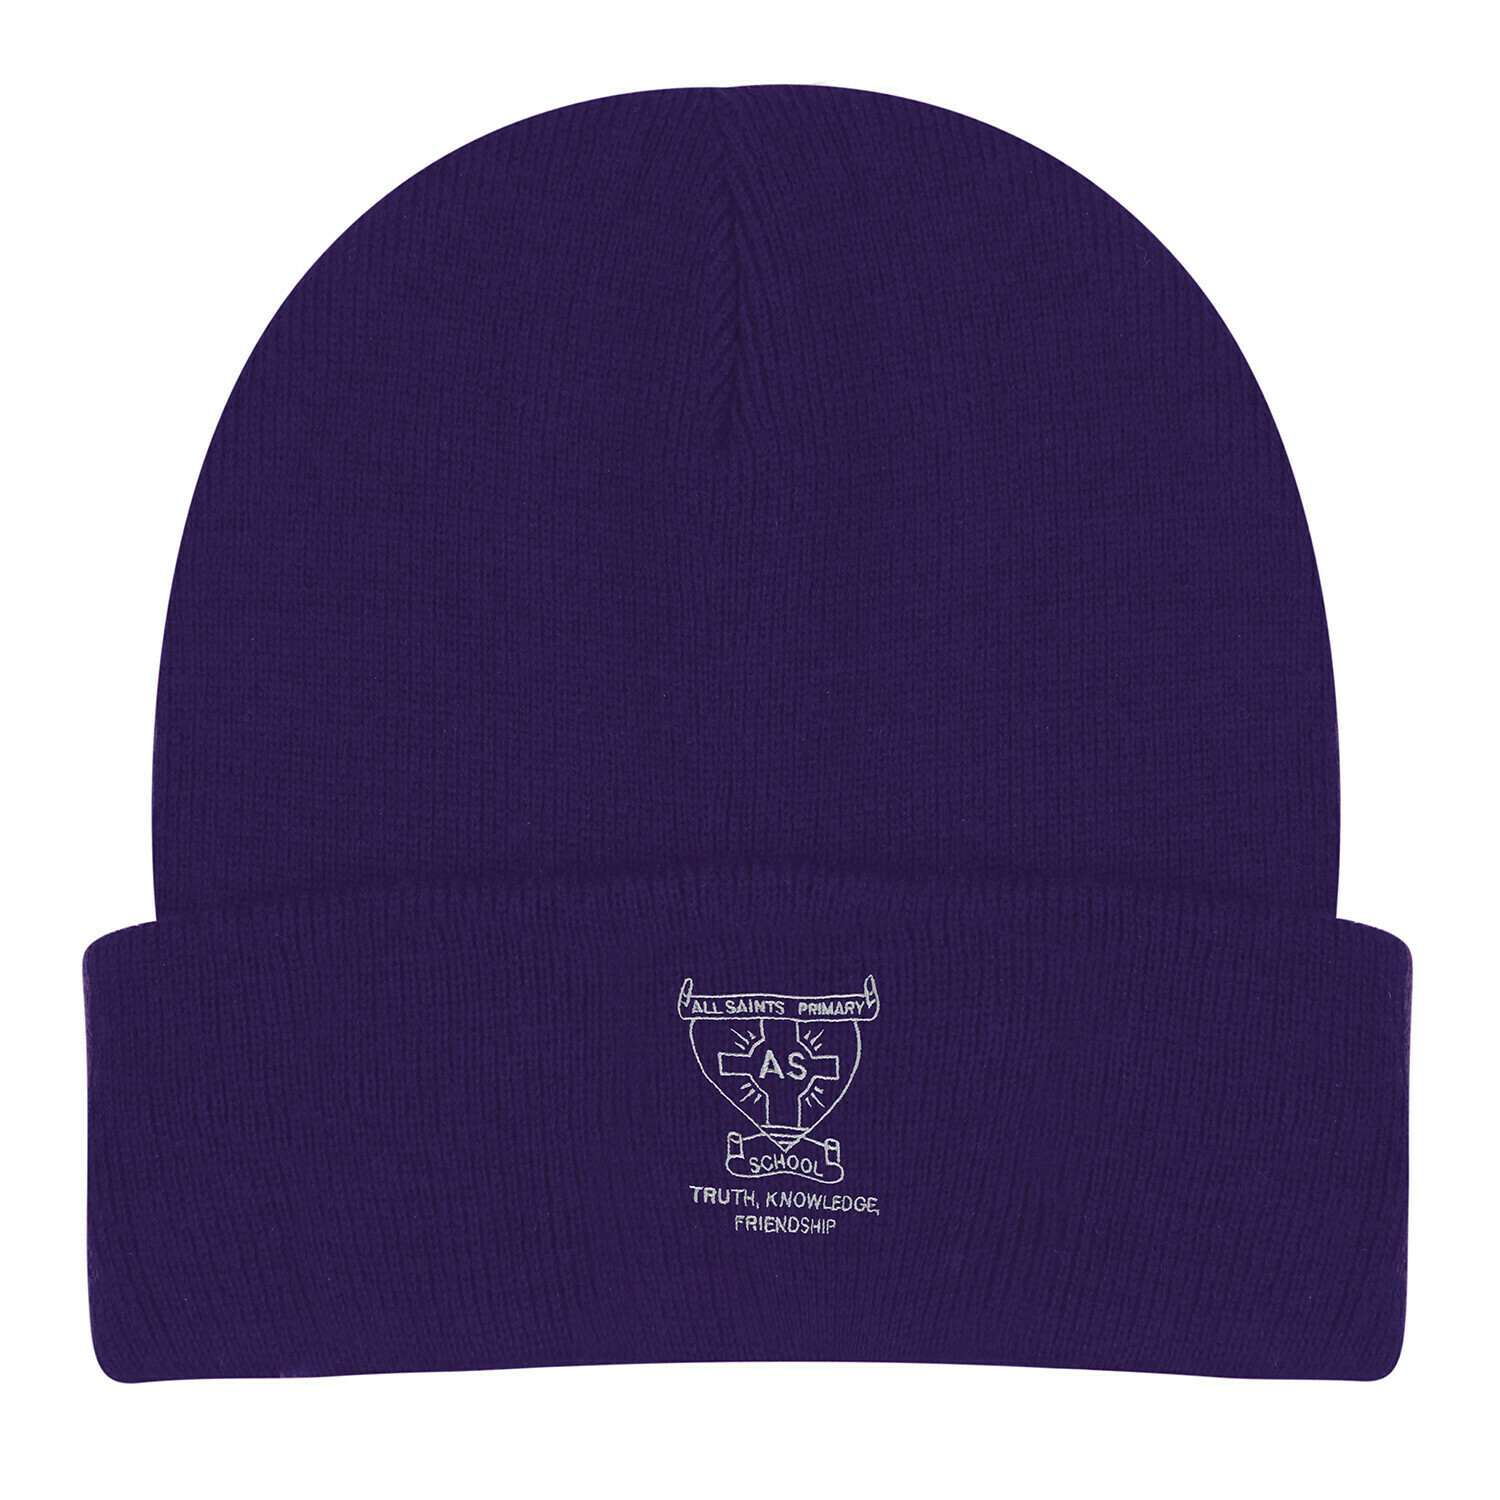 All Saints Primary Staff Wooly Hat